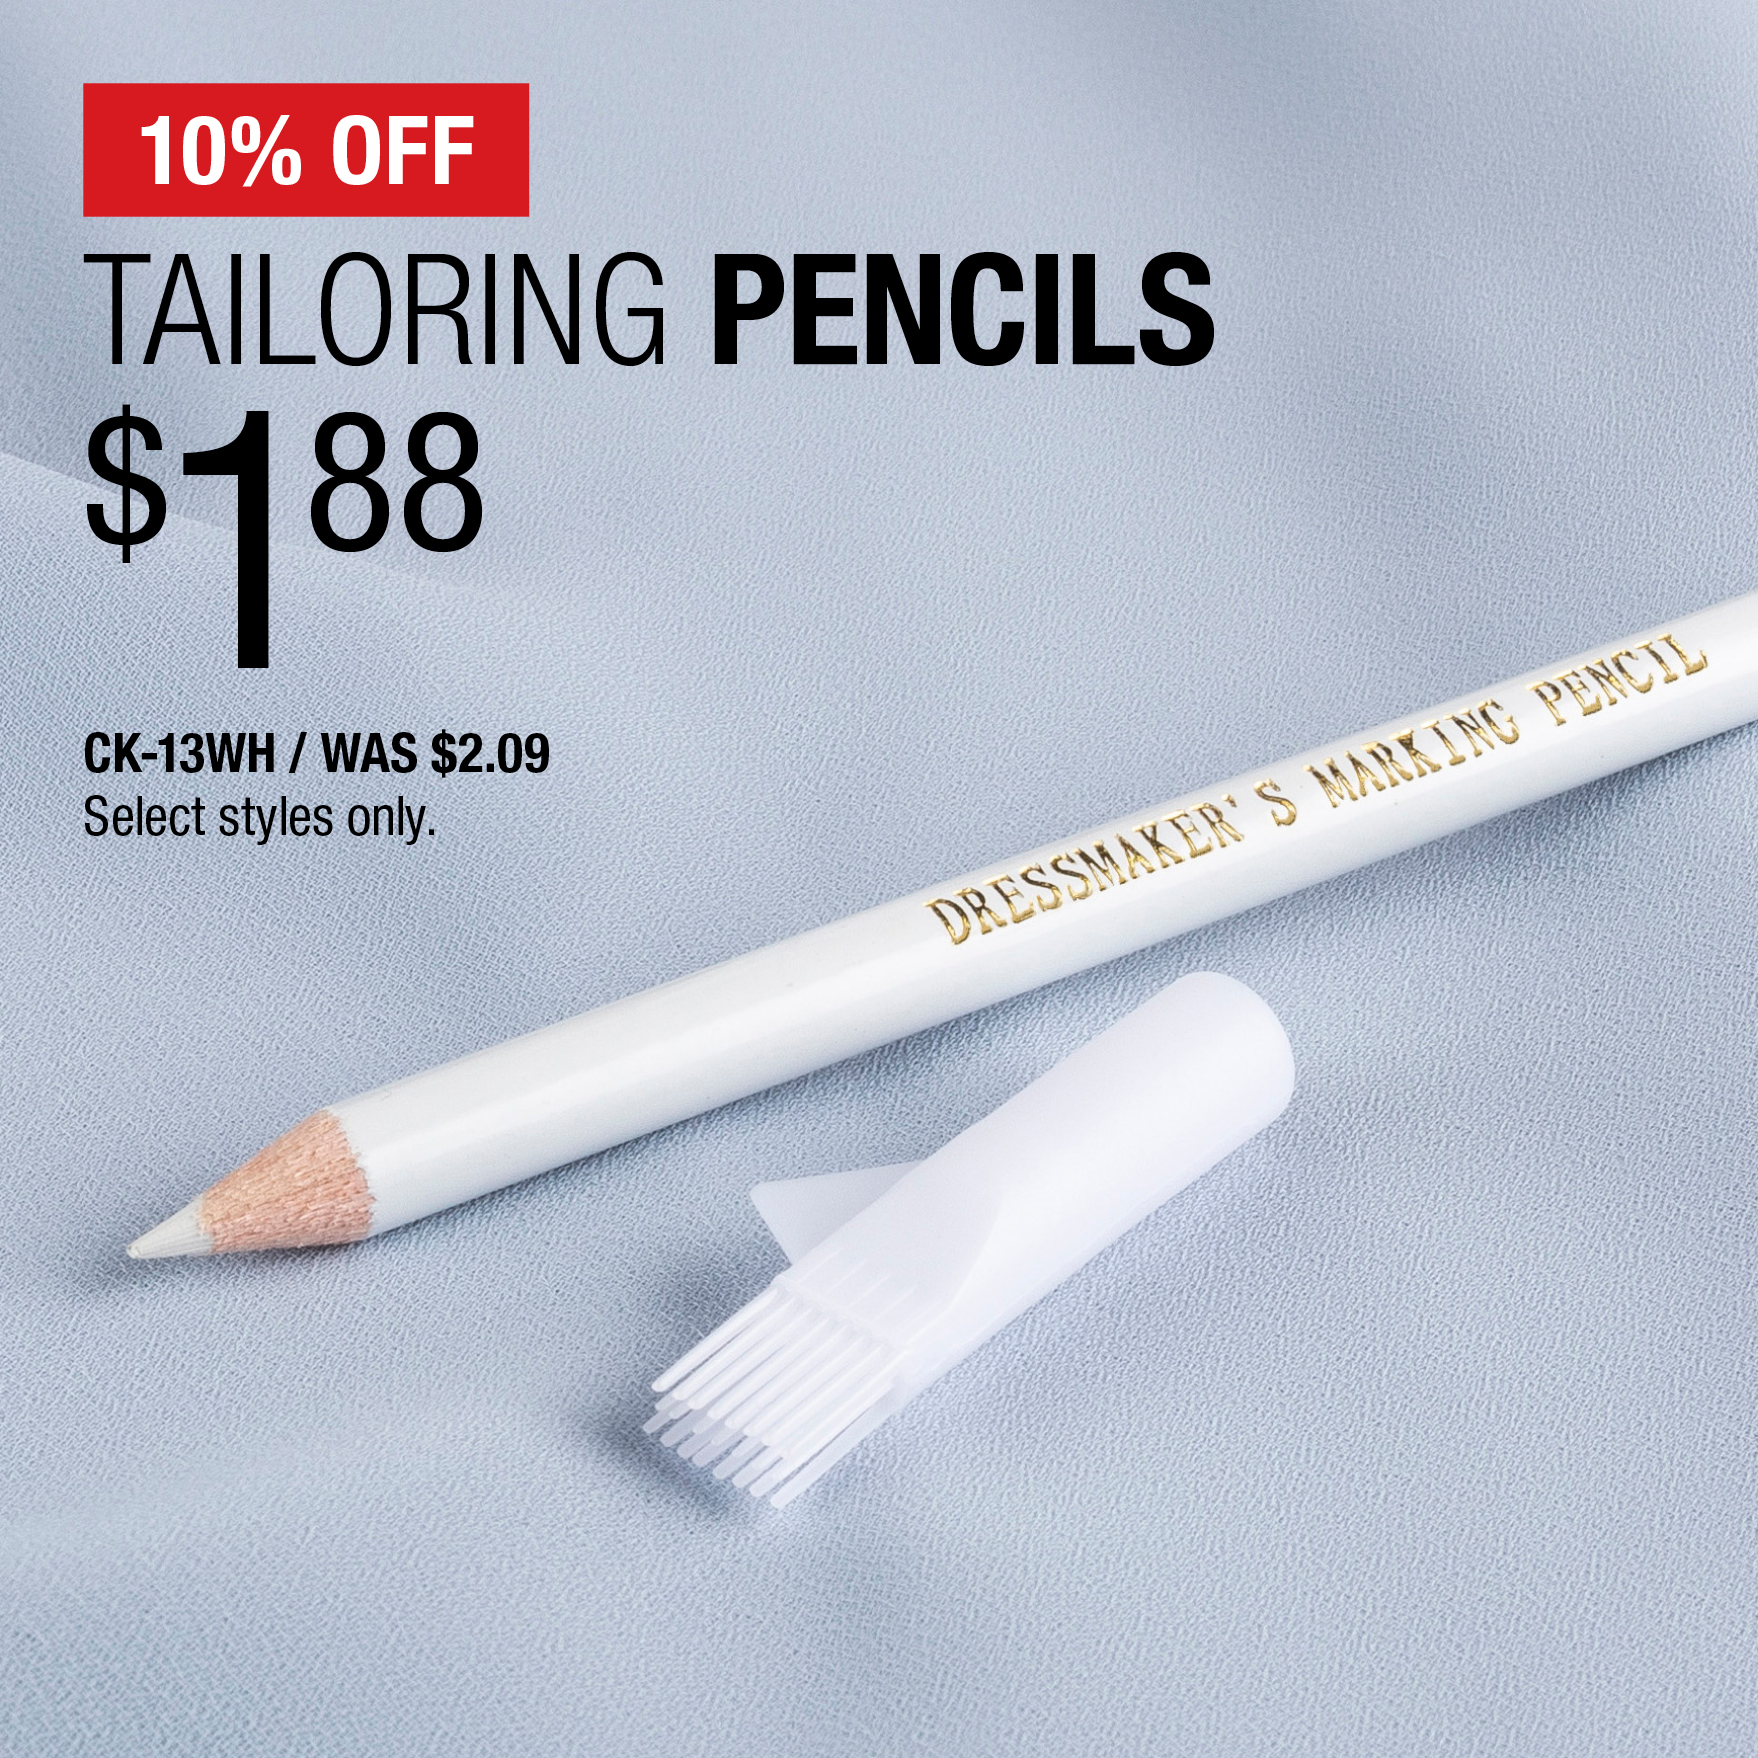 10% Off Tailoring Pencils $1.88 / CK-13WH / Was $2.09 / Select styles only.